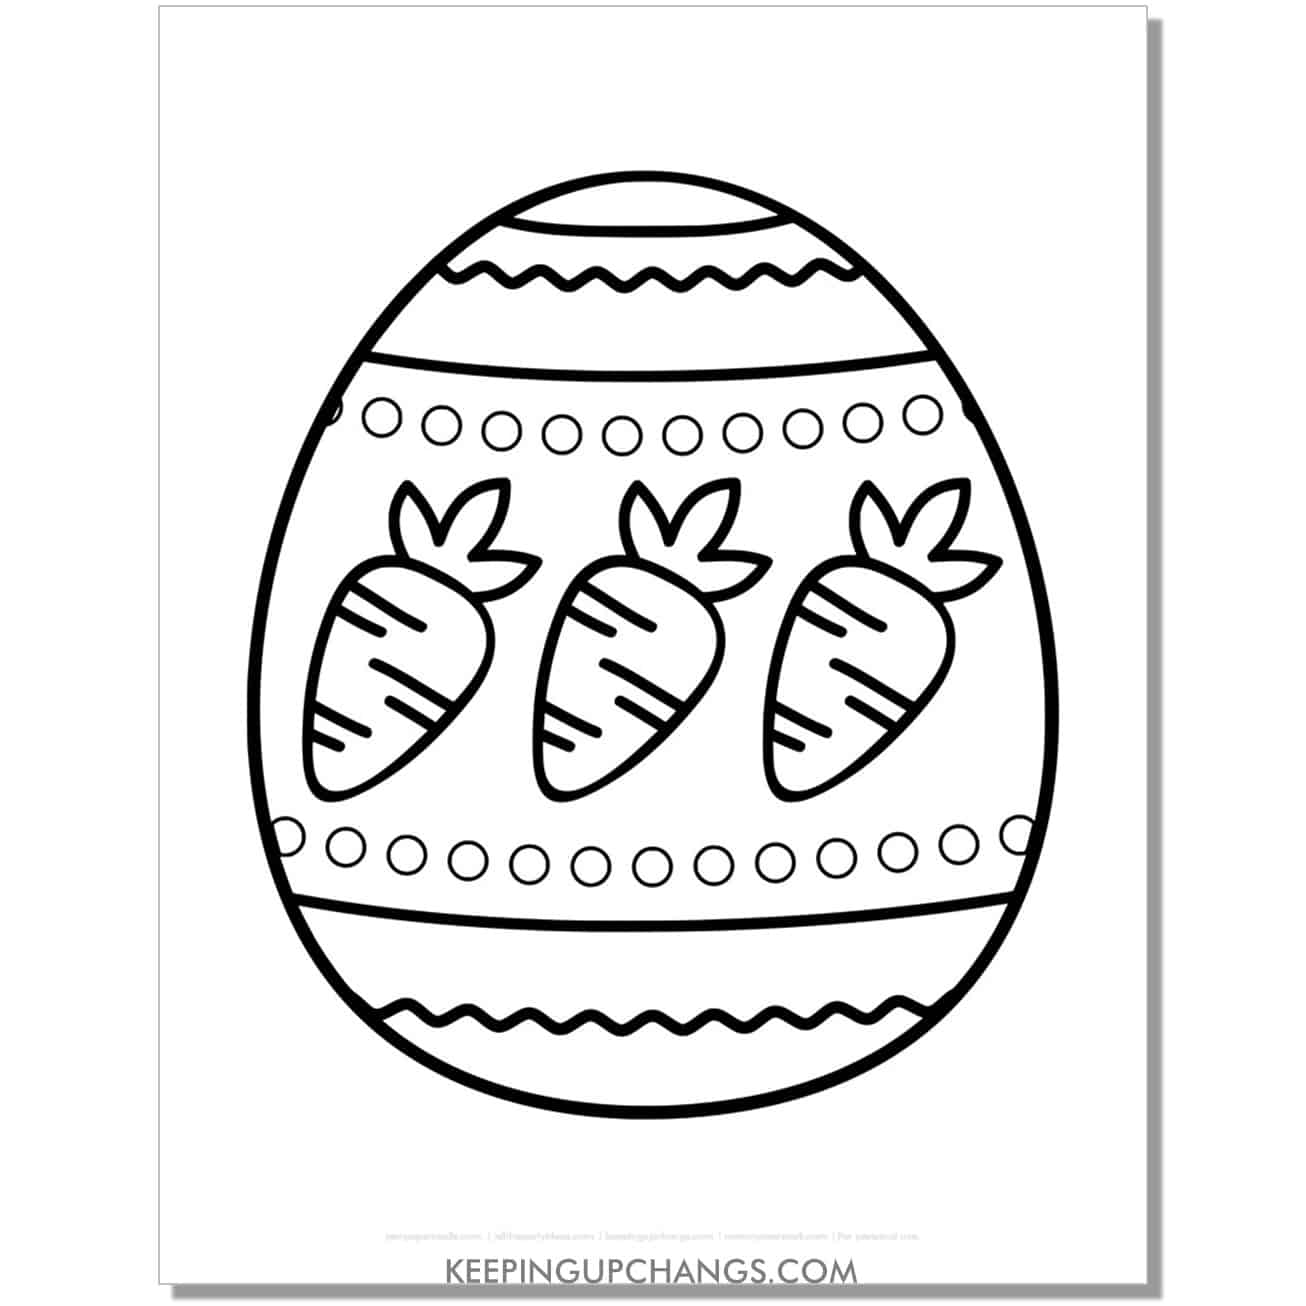 free large easter egg with carrot pattern coloring page, sheet.